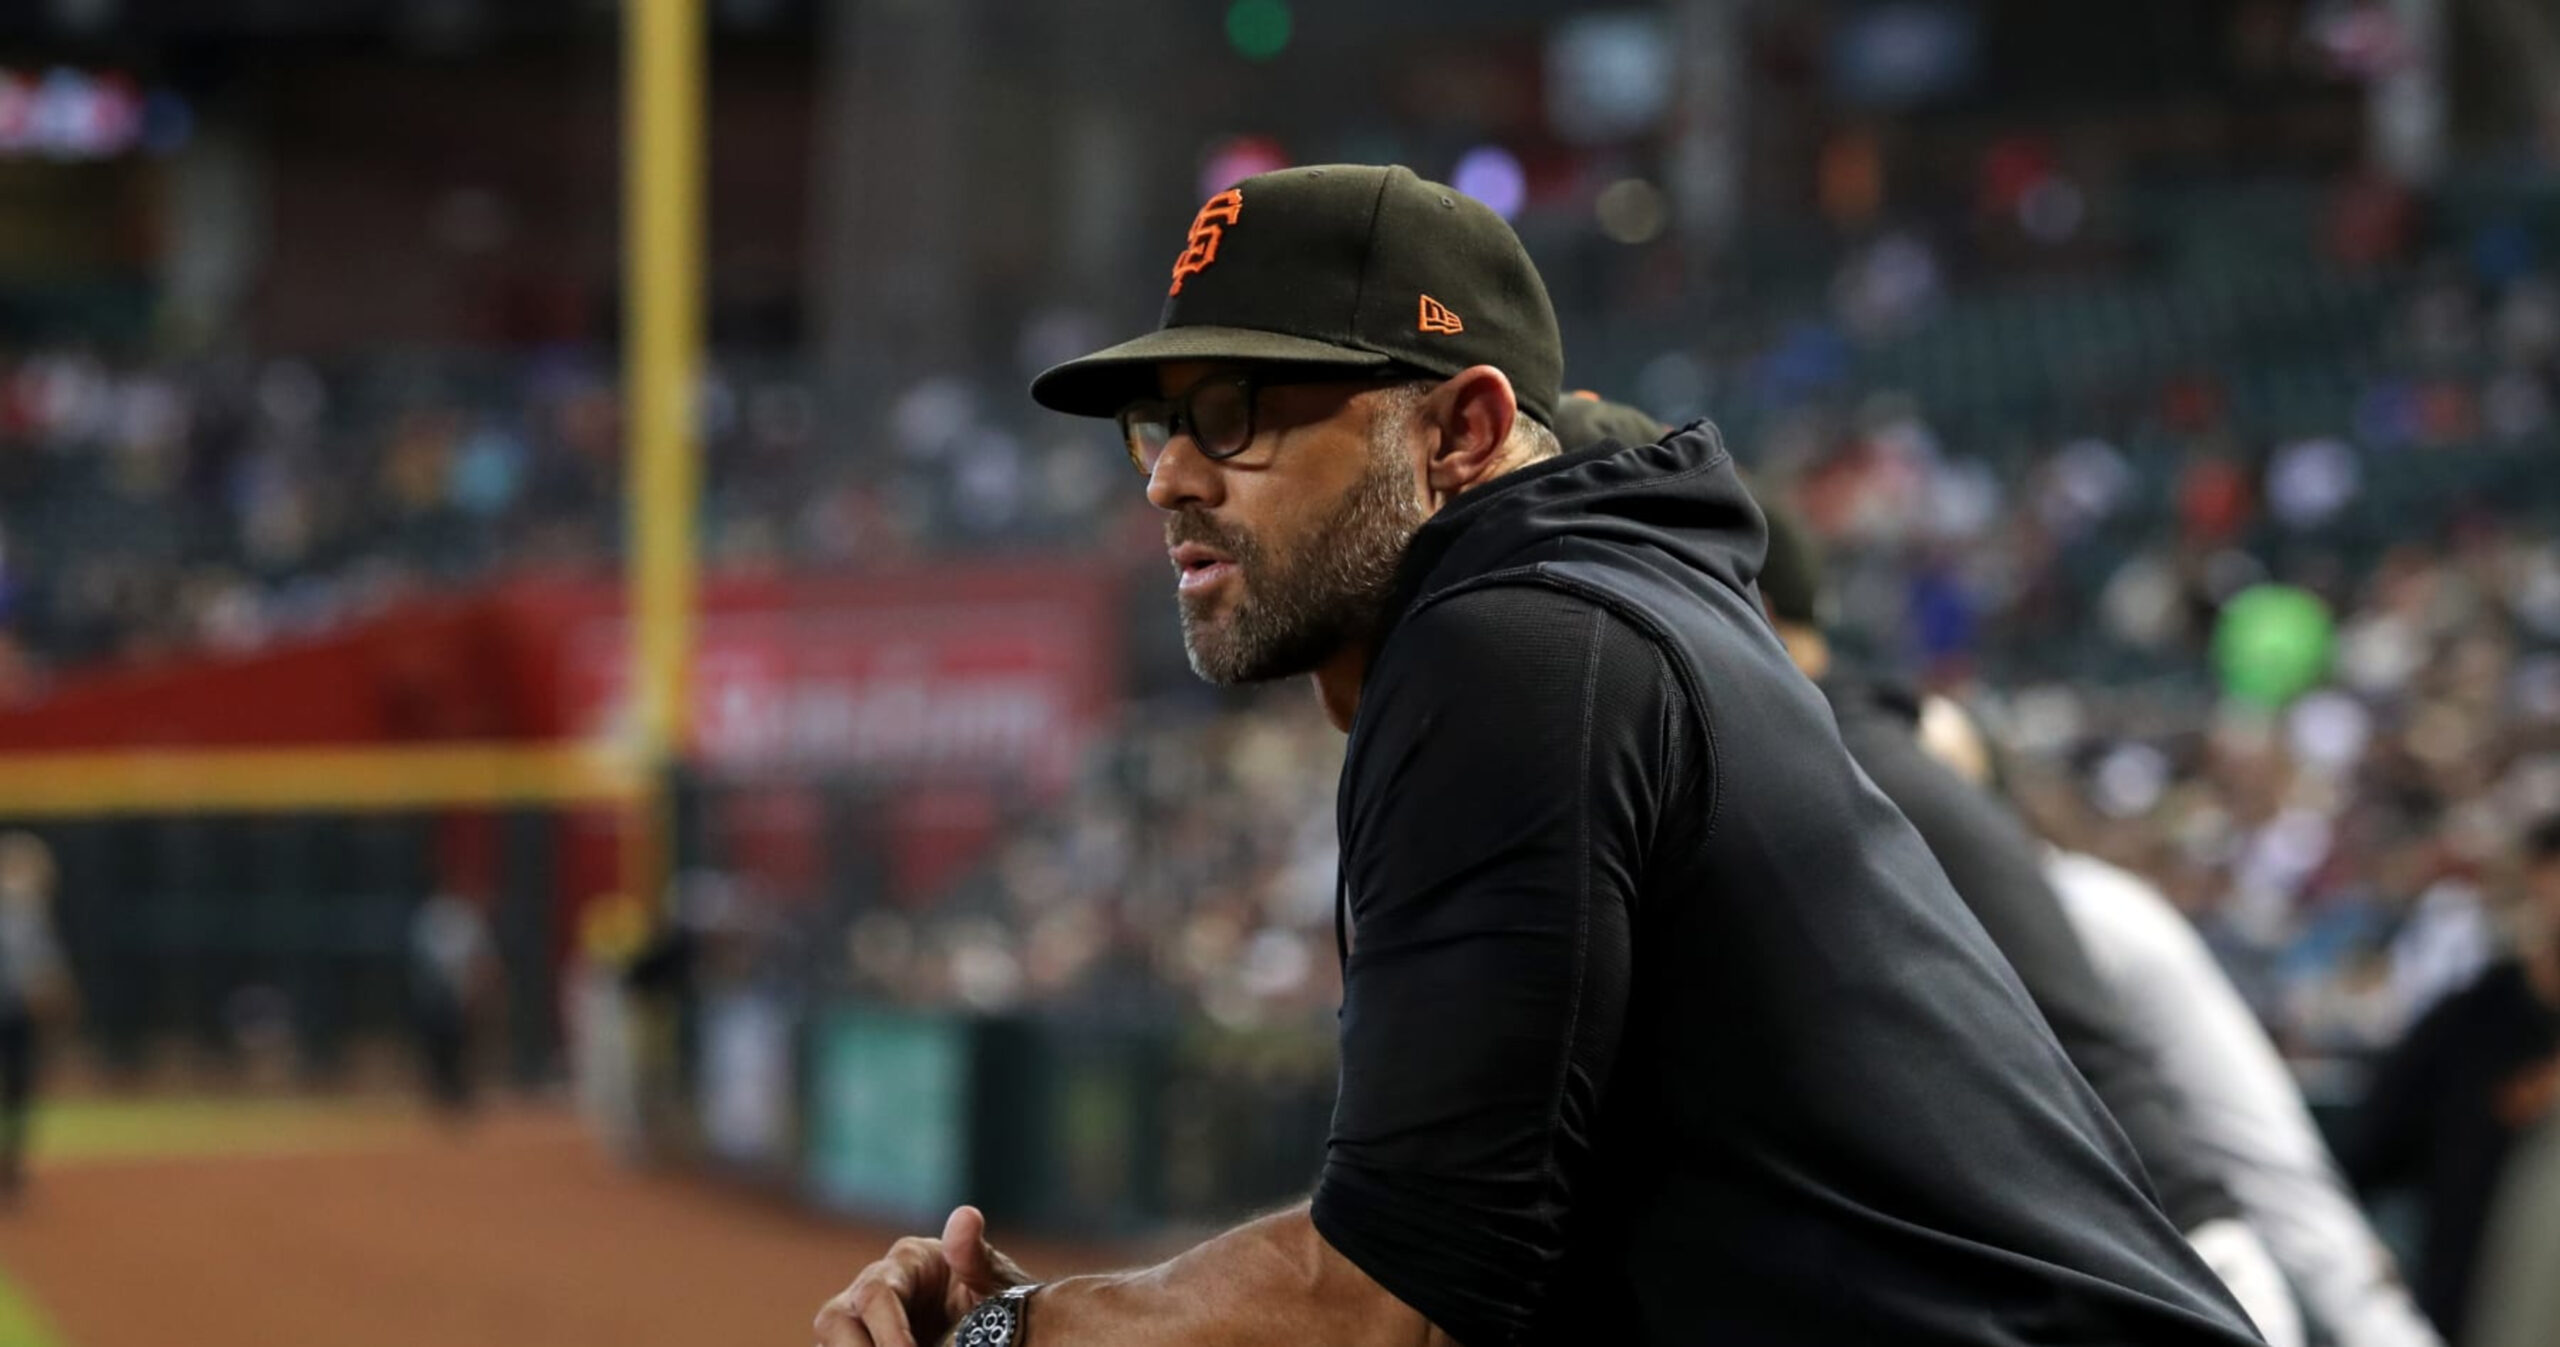 Gabe Kapler Fired as Giants Manager After 4 Seasons, 295-248 Record with Team